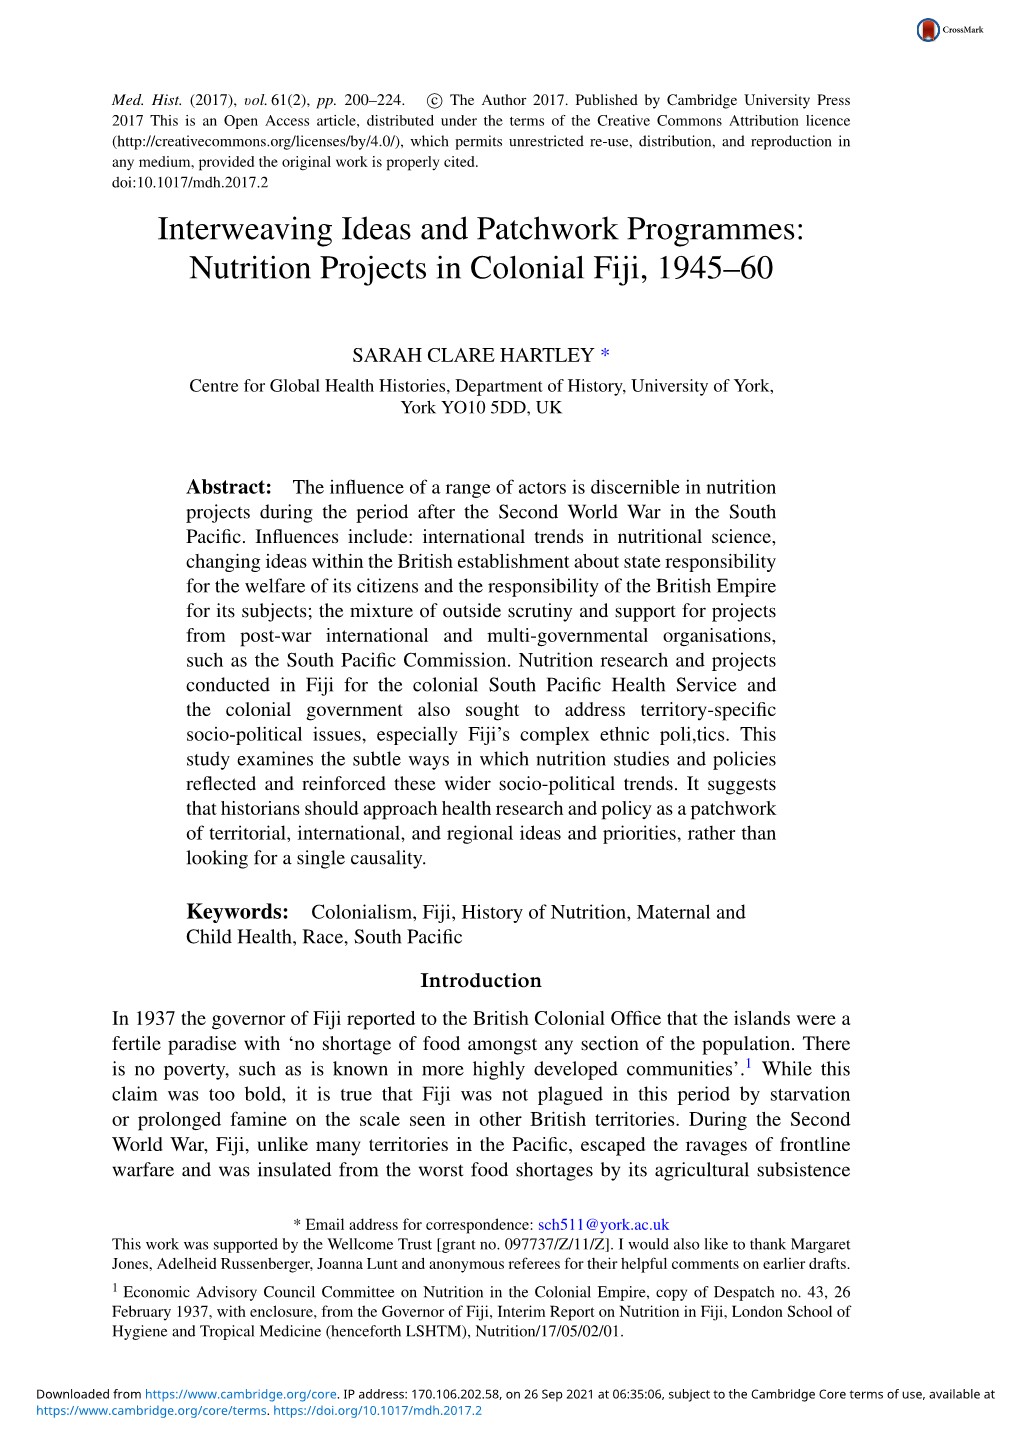 Interweaving Ideas and Patchwork Programmes: Nutrition Projects in Colonial Fiji, 1945–60